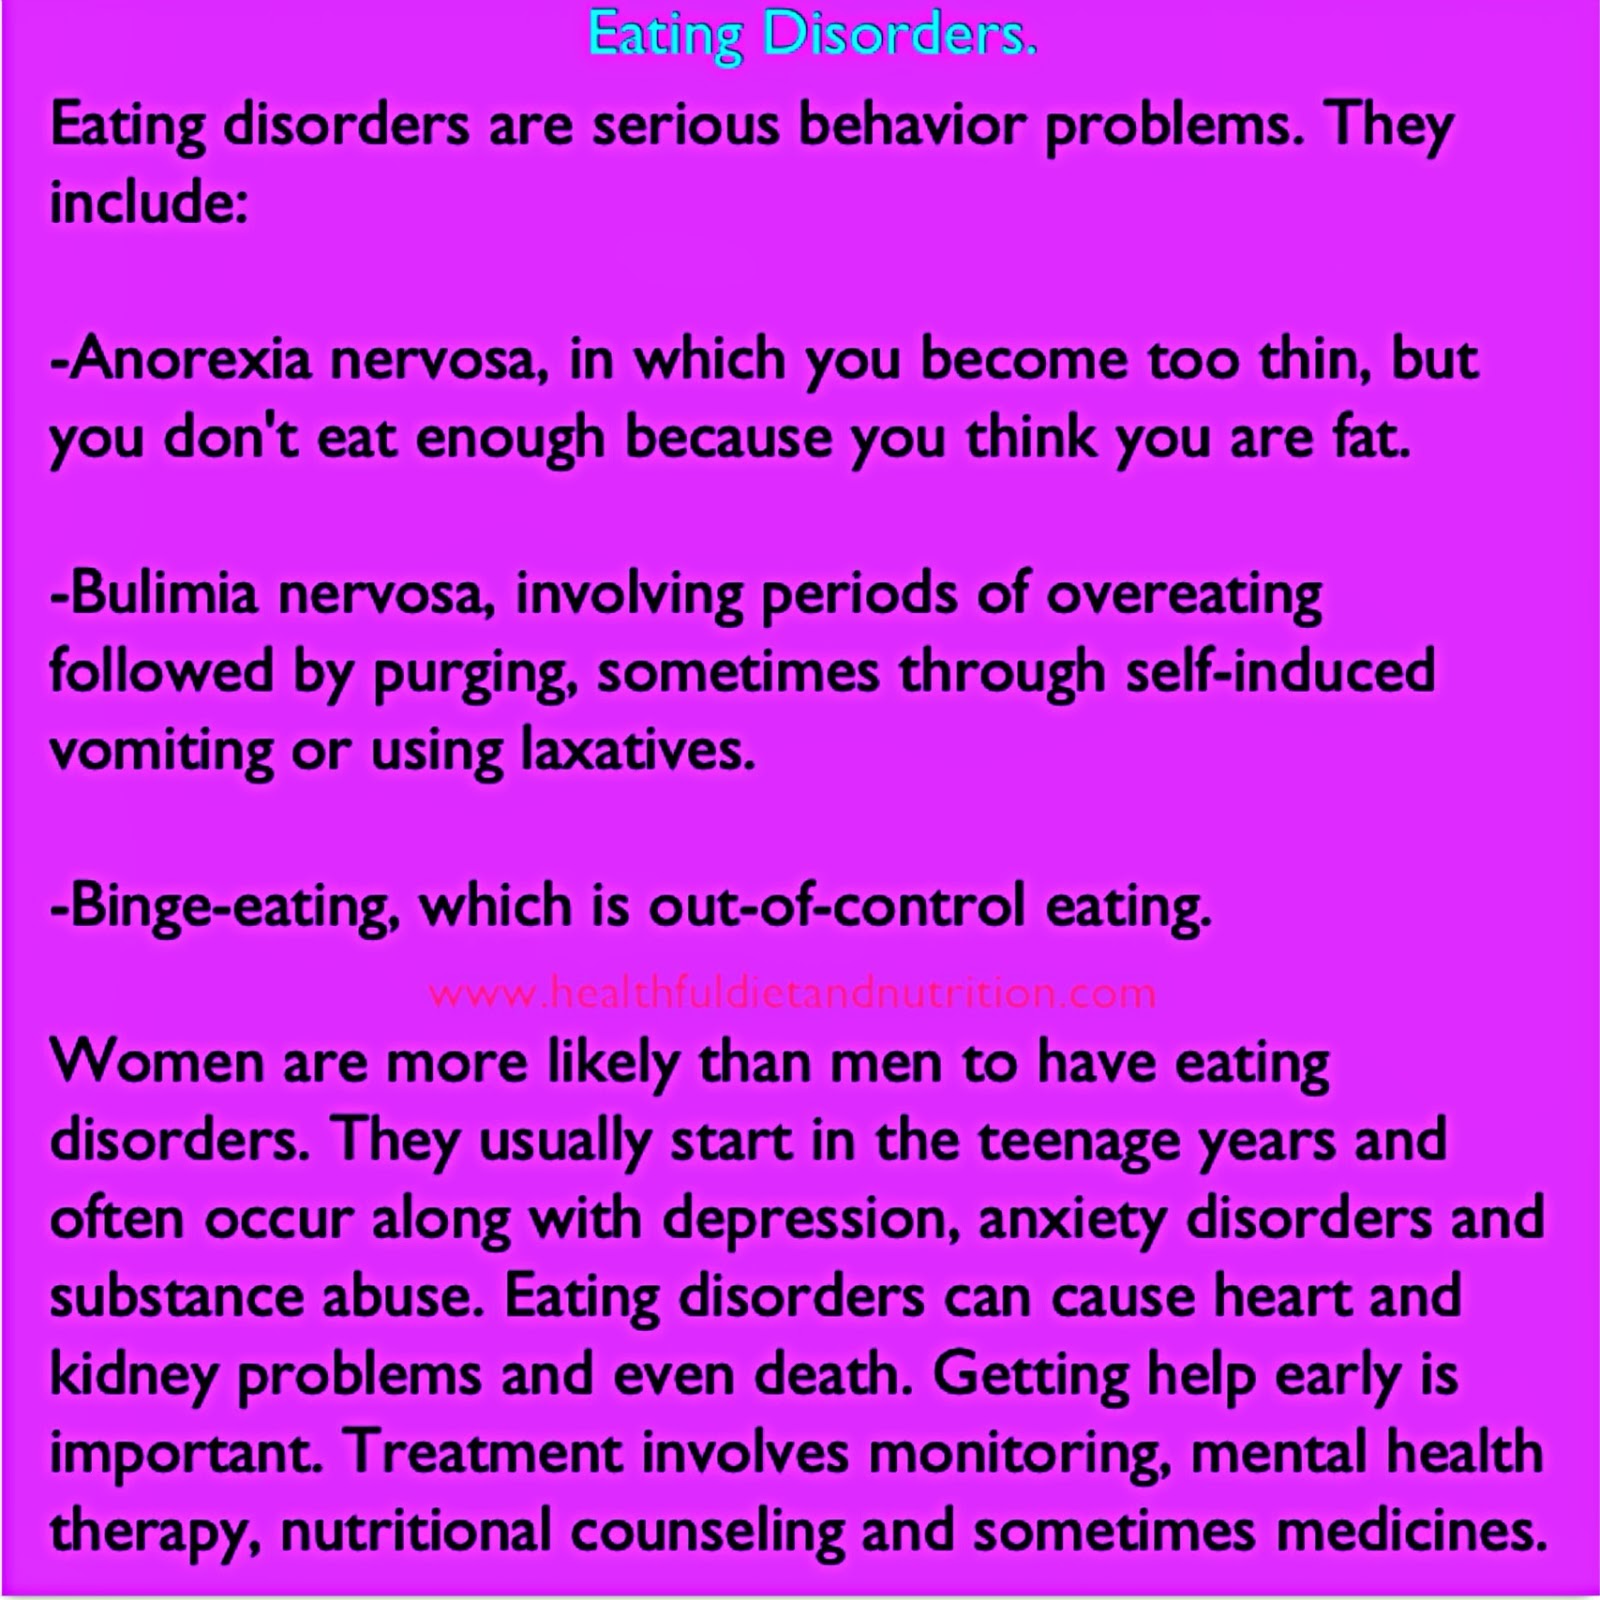 What Are Eating Disorders?